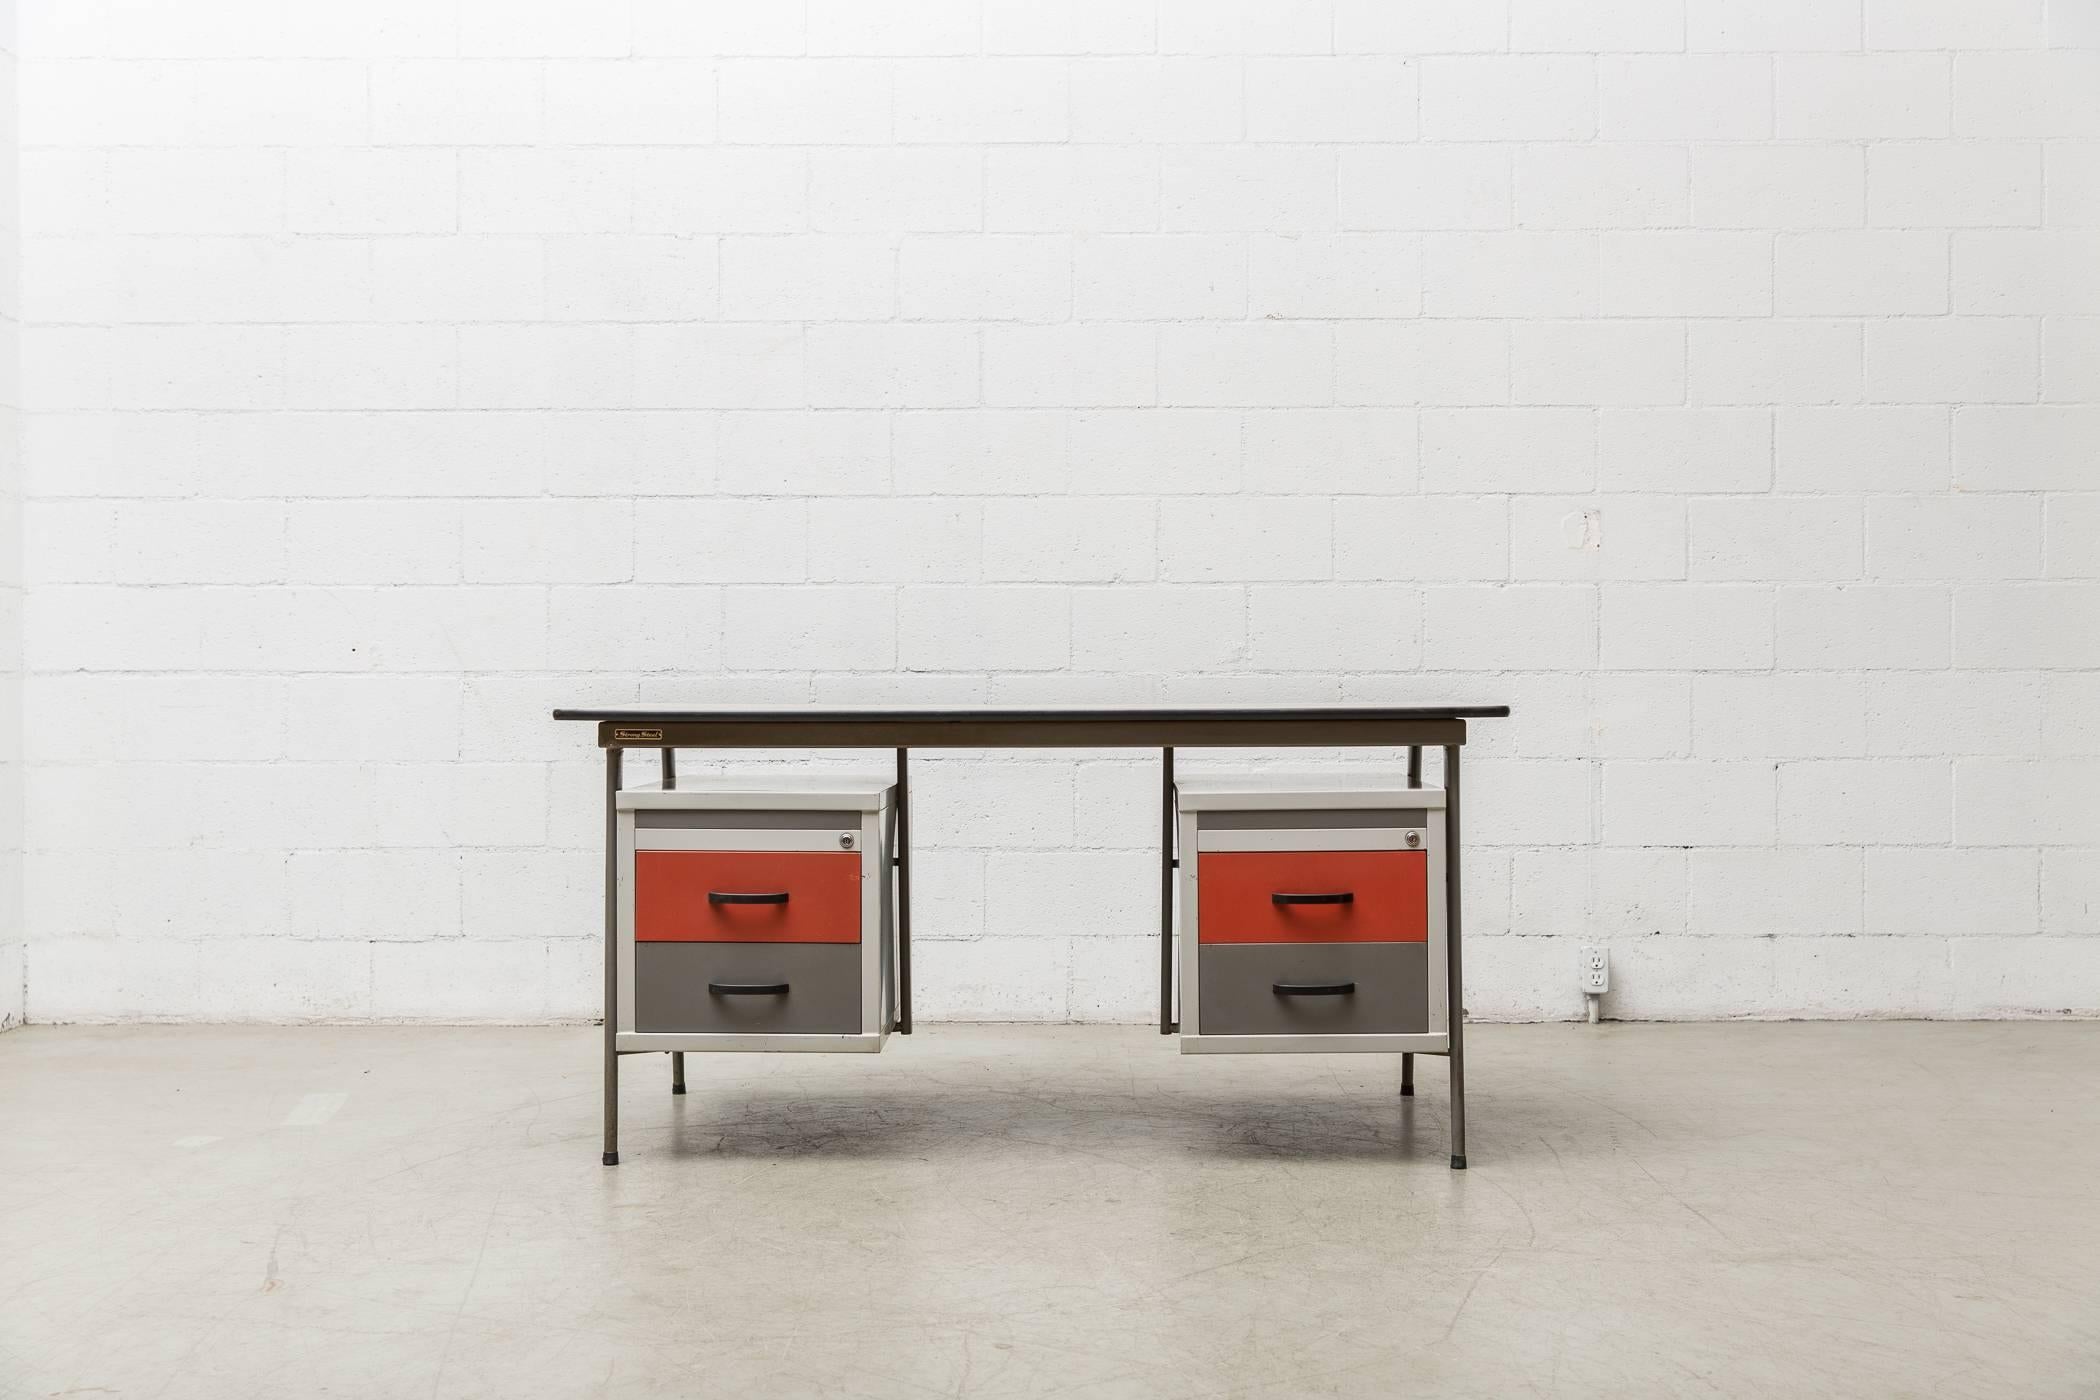 Stunning 1950s Drentea office desk with light grey enameled metal frame, red and grey enameled metal drawers with linoleum top. Tag Reads 'Strong Steel.' In original condition with wear consistent with its age and usage. Chairs opening is 19.75